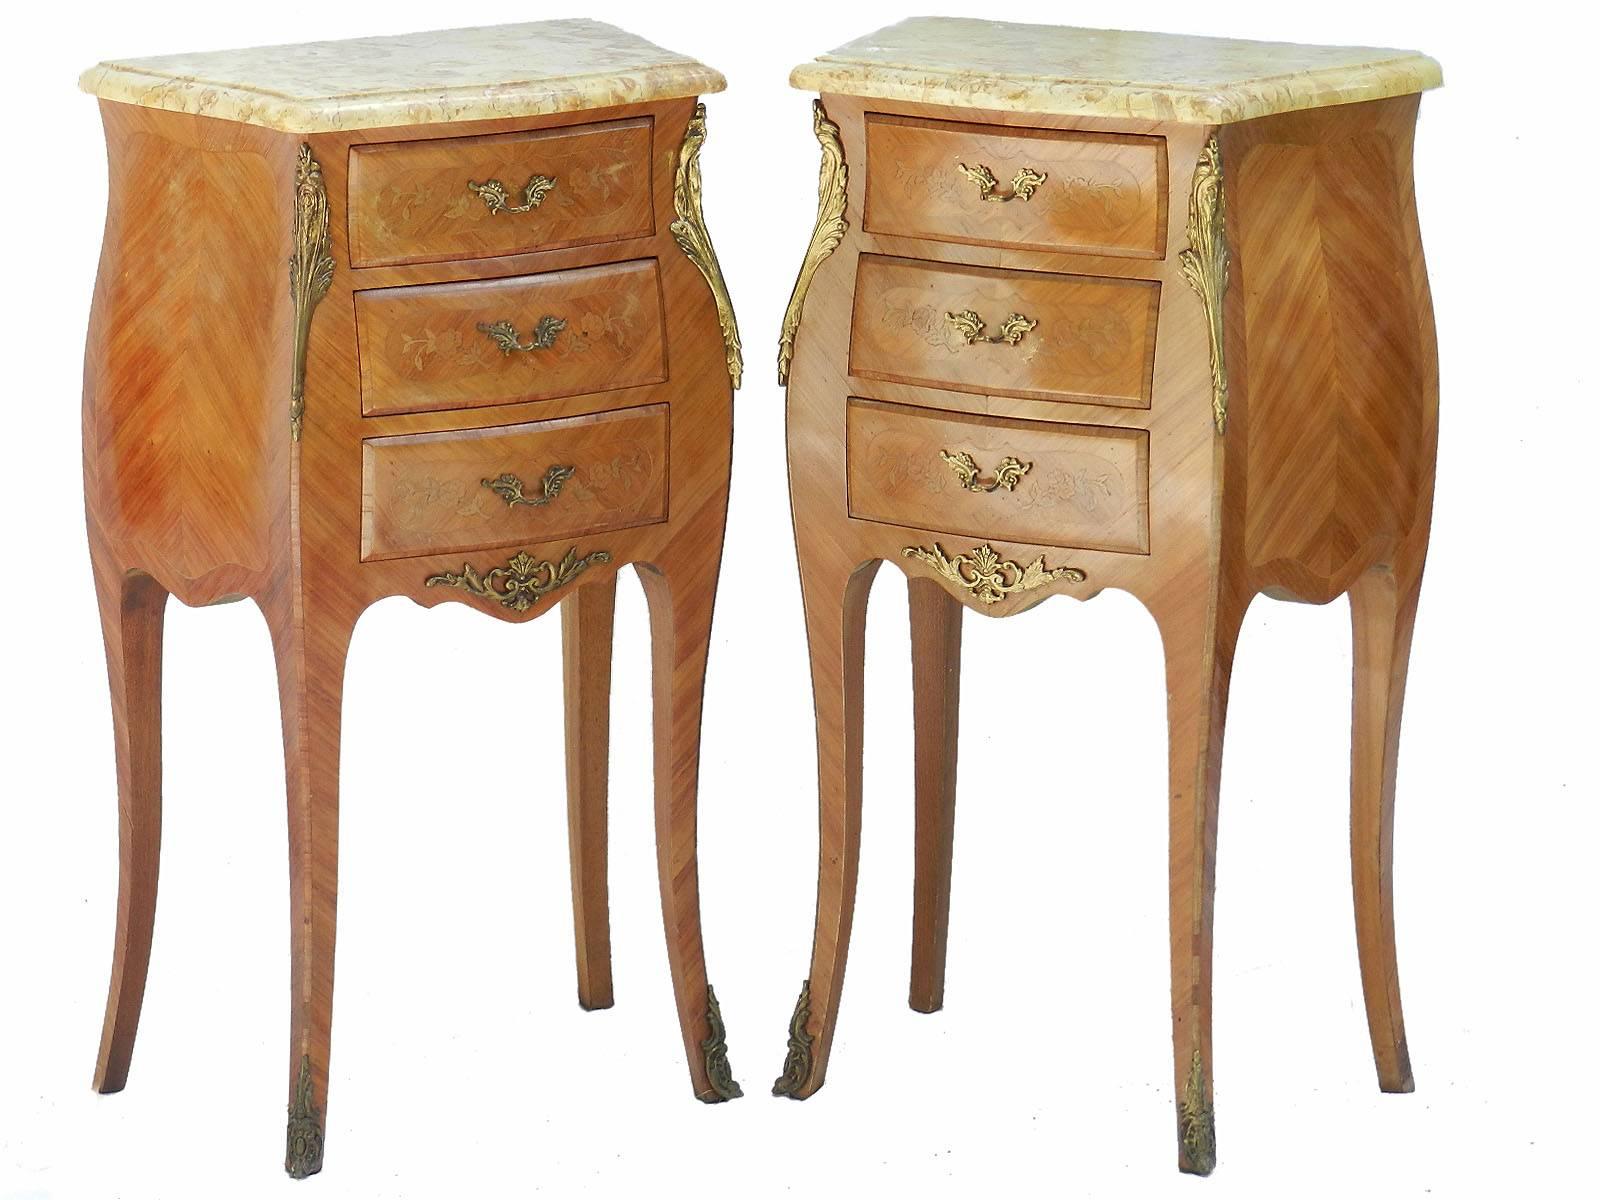 Pair of French tulipwood side cabinets French Louis XV revival
Nightstands bedside tables
Serpentine variegated marble tops
Ormolu
Floral decoration to the drawers
Very good condition for their age with only minor signs of use for their